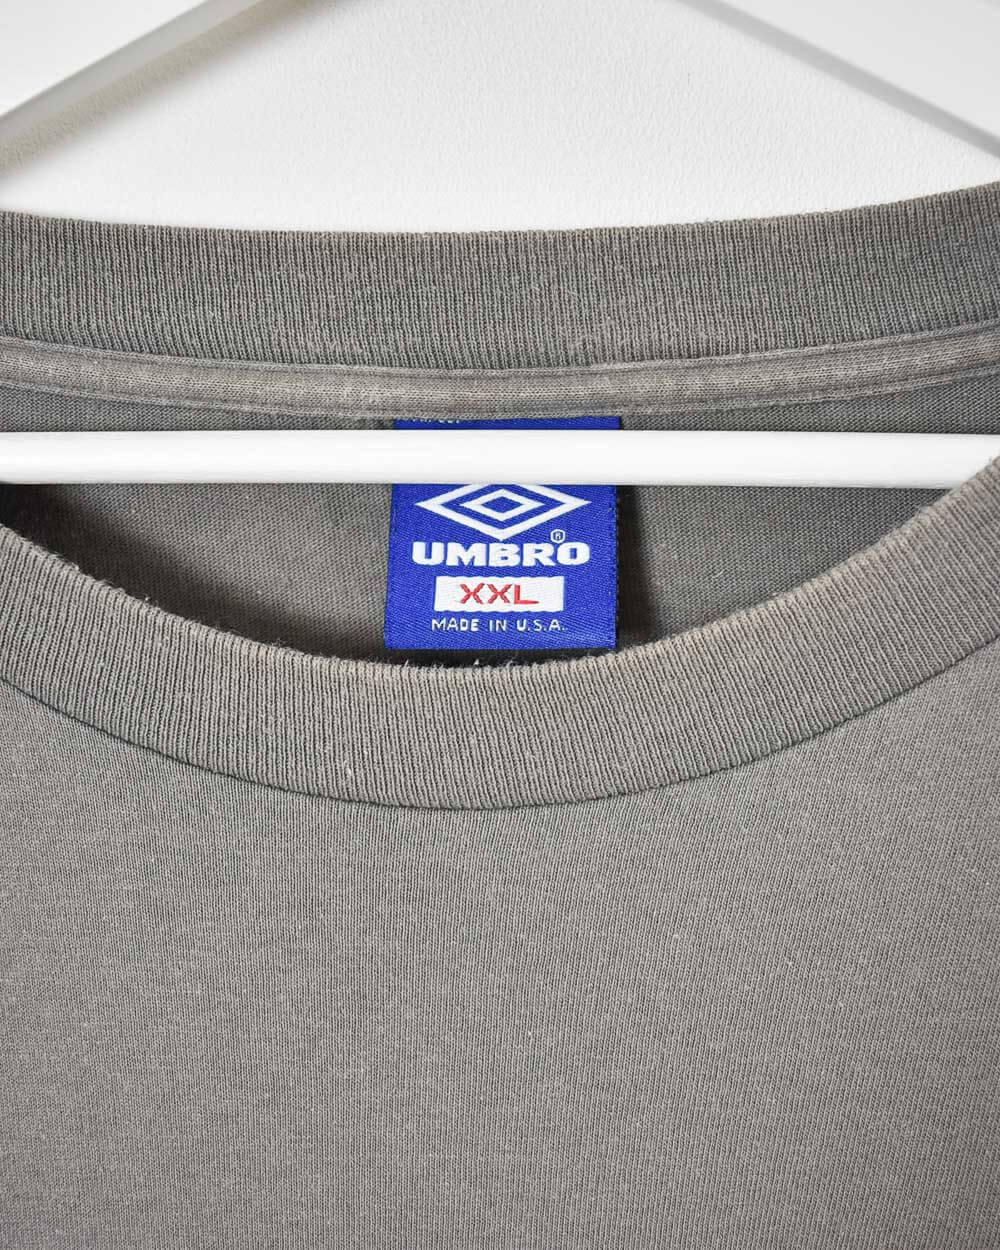 Grey Umbro Soccer Authentic Since 1924 T-Shirt - XX-Large